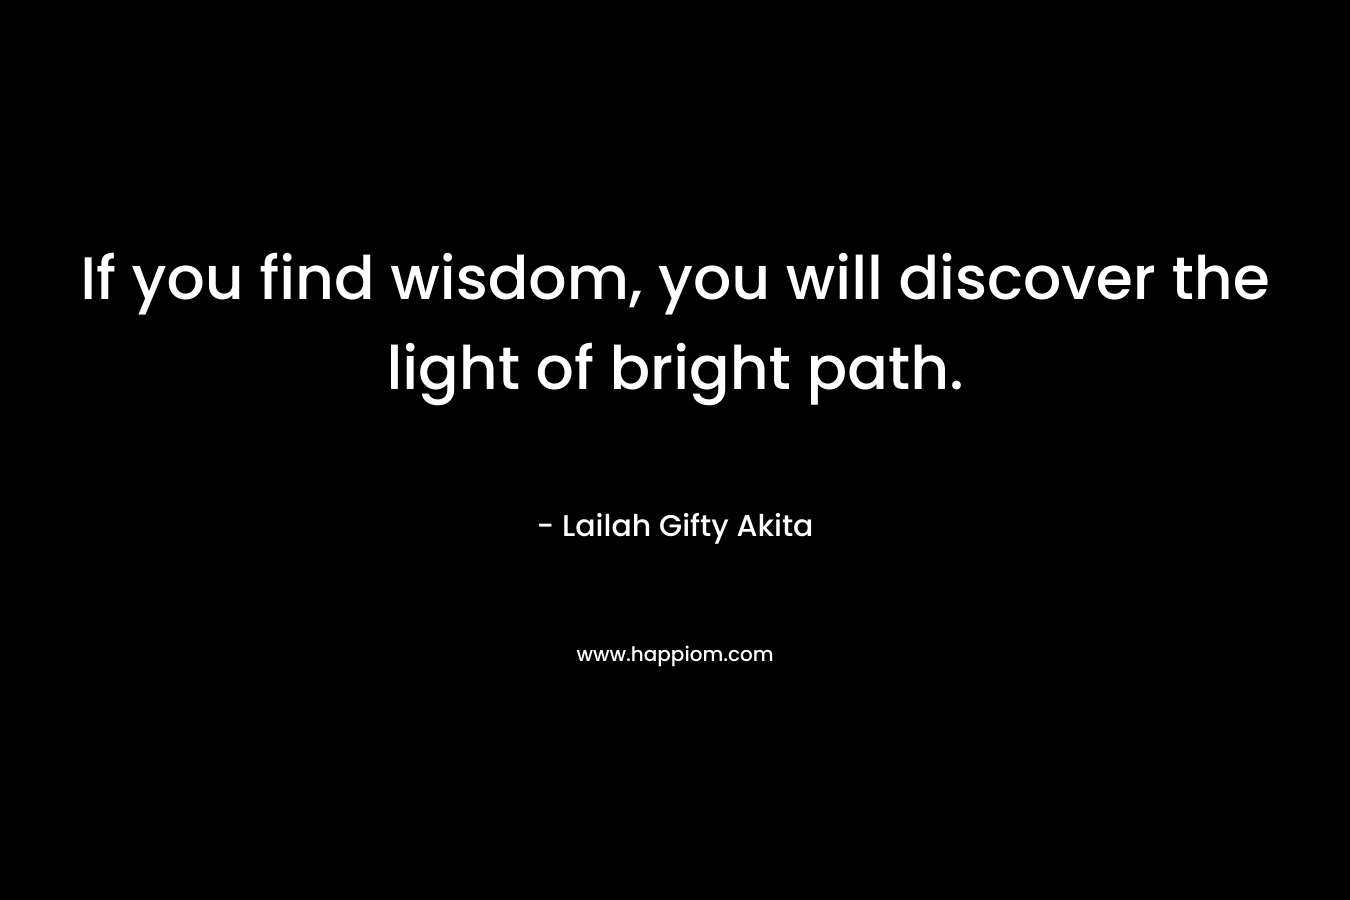 If you find wisdom, you will discover the light of bright path.